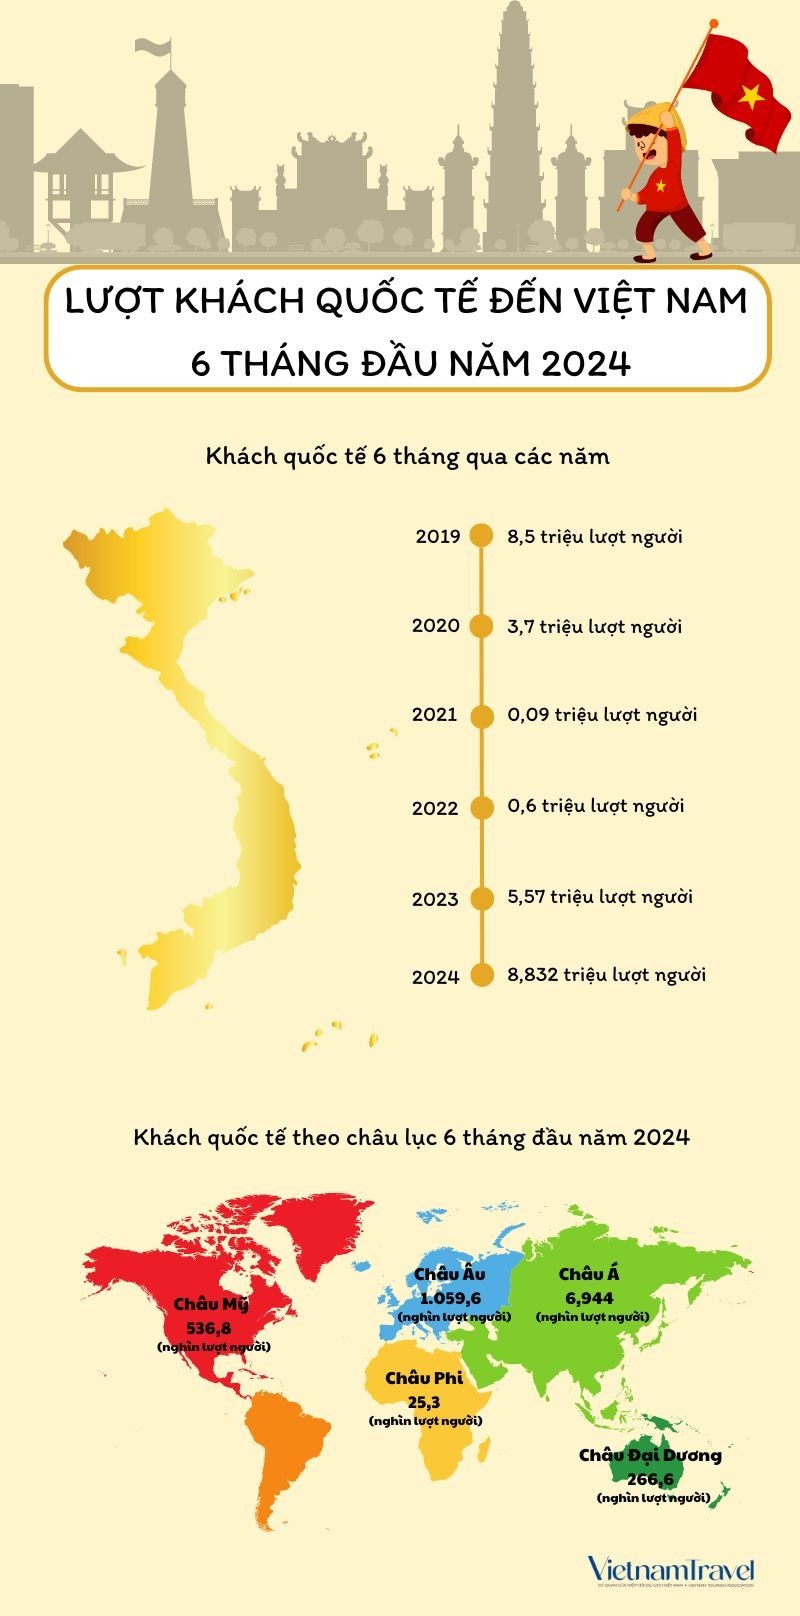 all-about-vietnam-infographic-in-yellow-and-cream-minimalist-style-1-1719820565.jpg